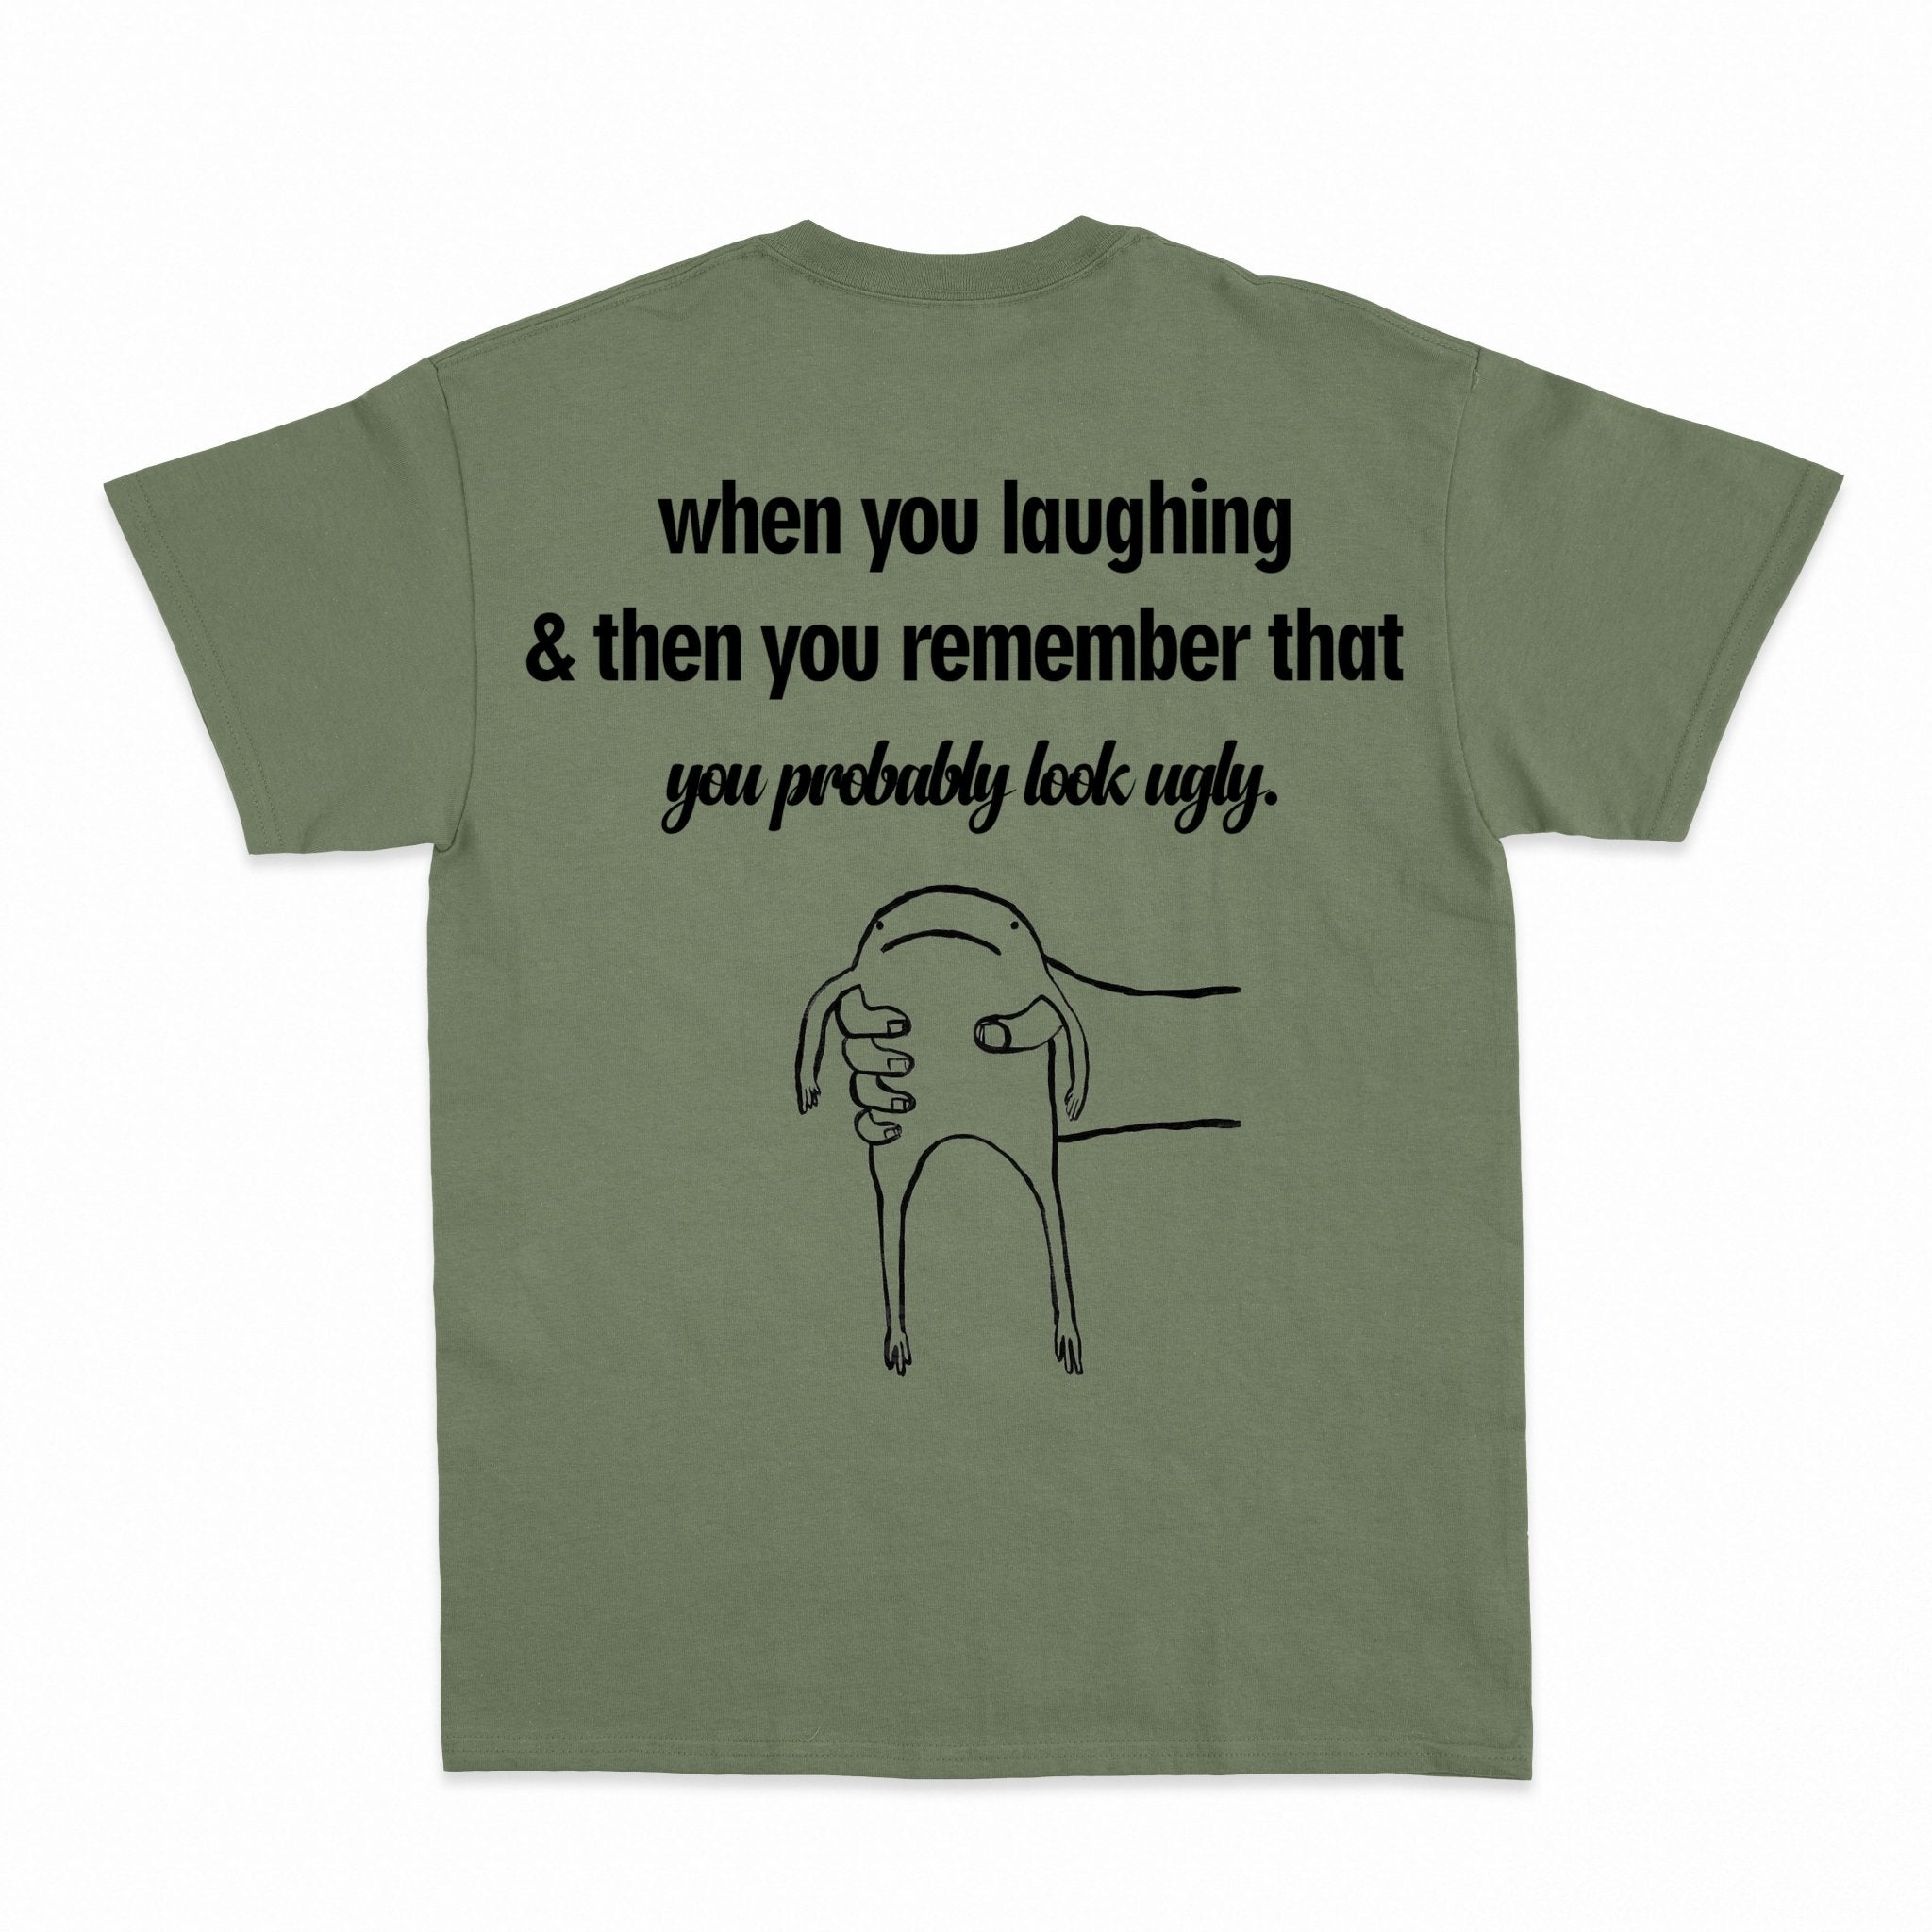 you probably look ugly Shirt - Shapelys